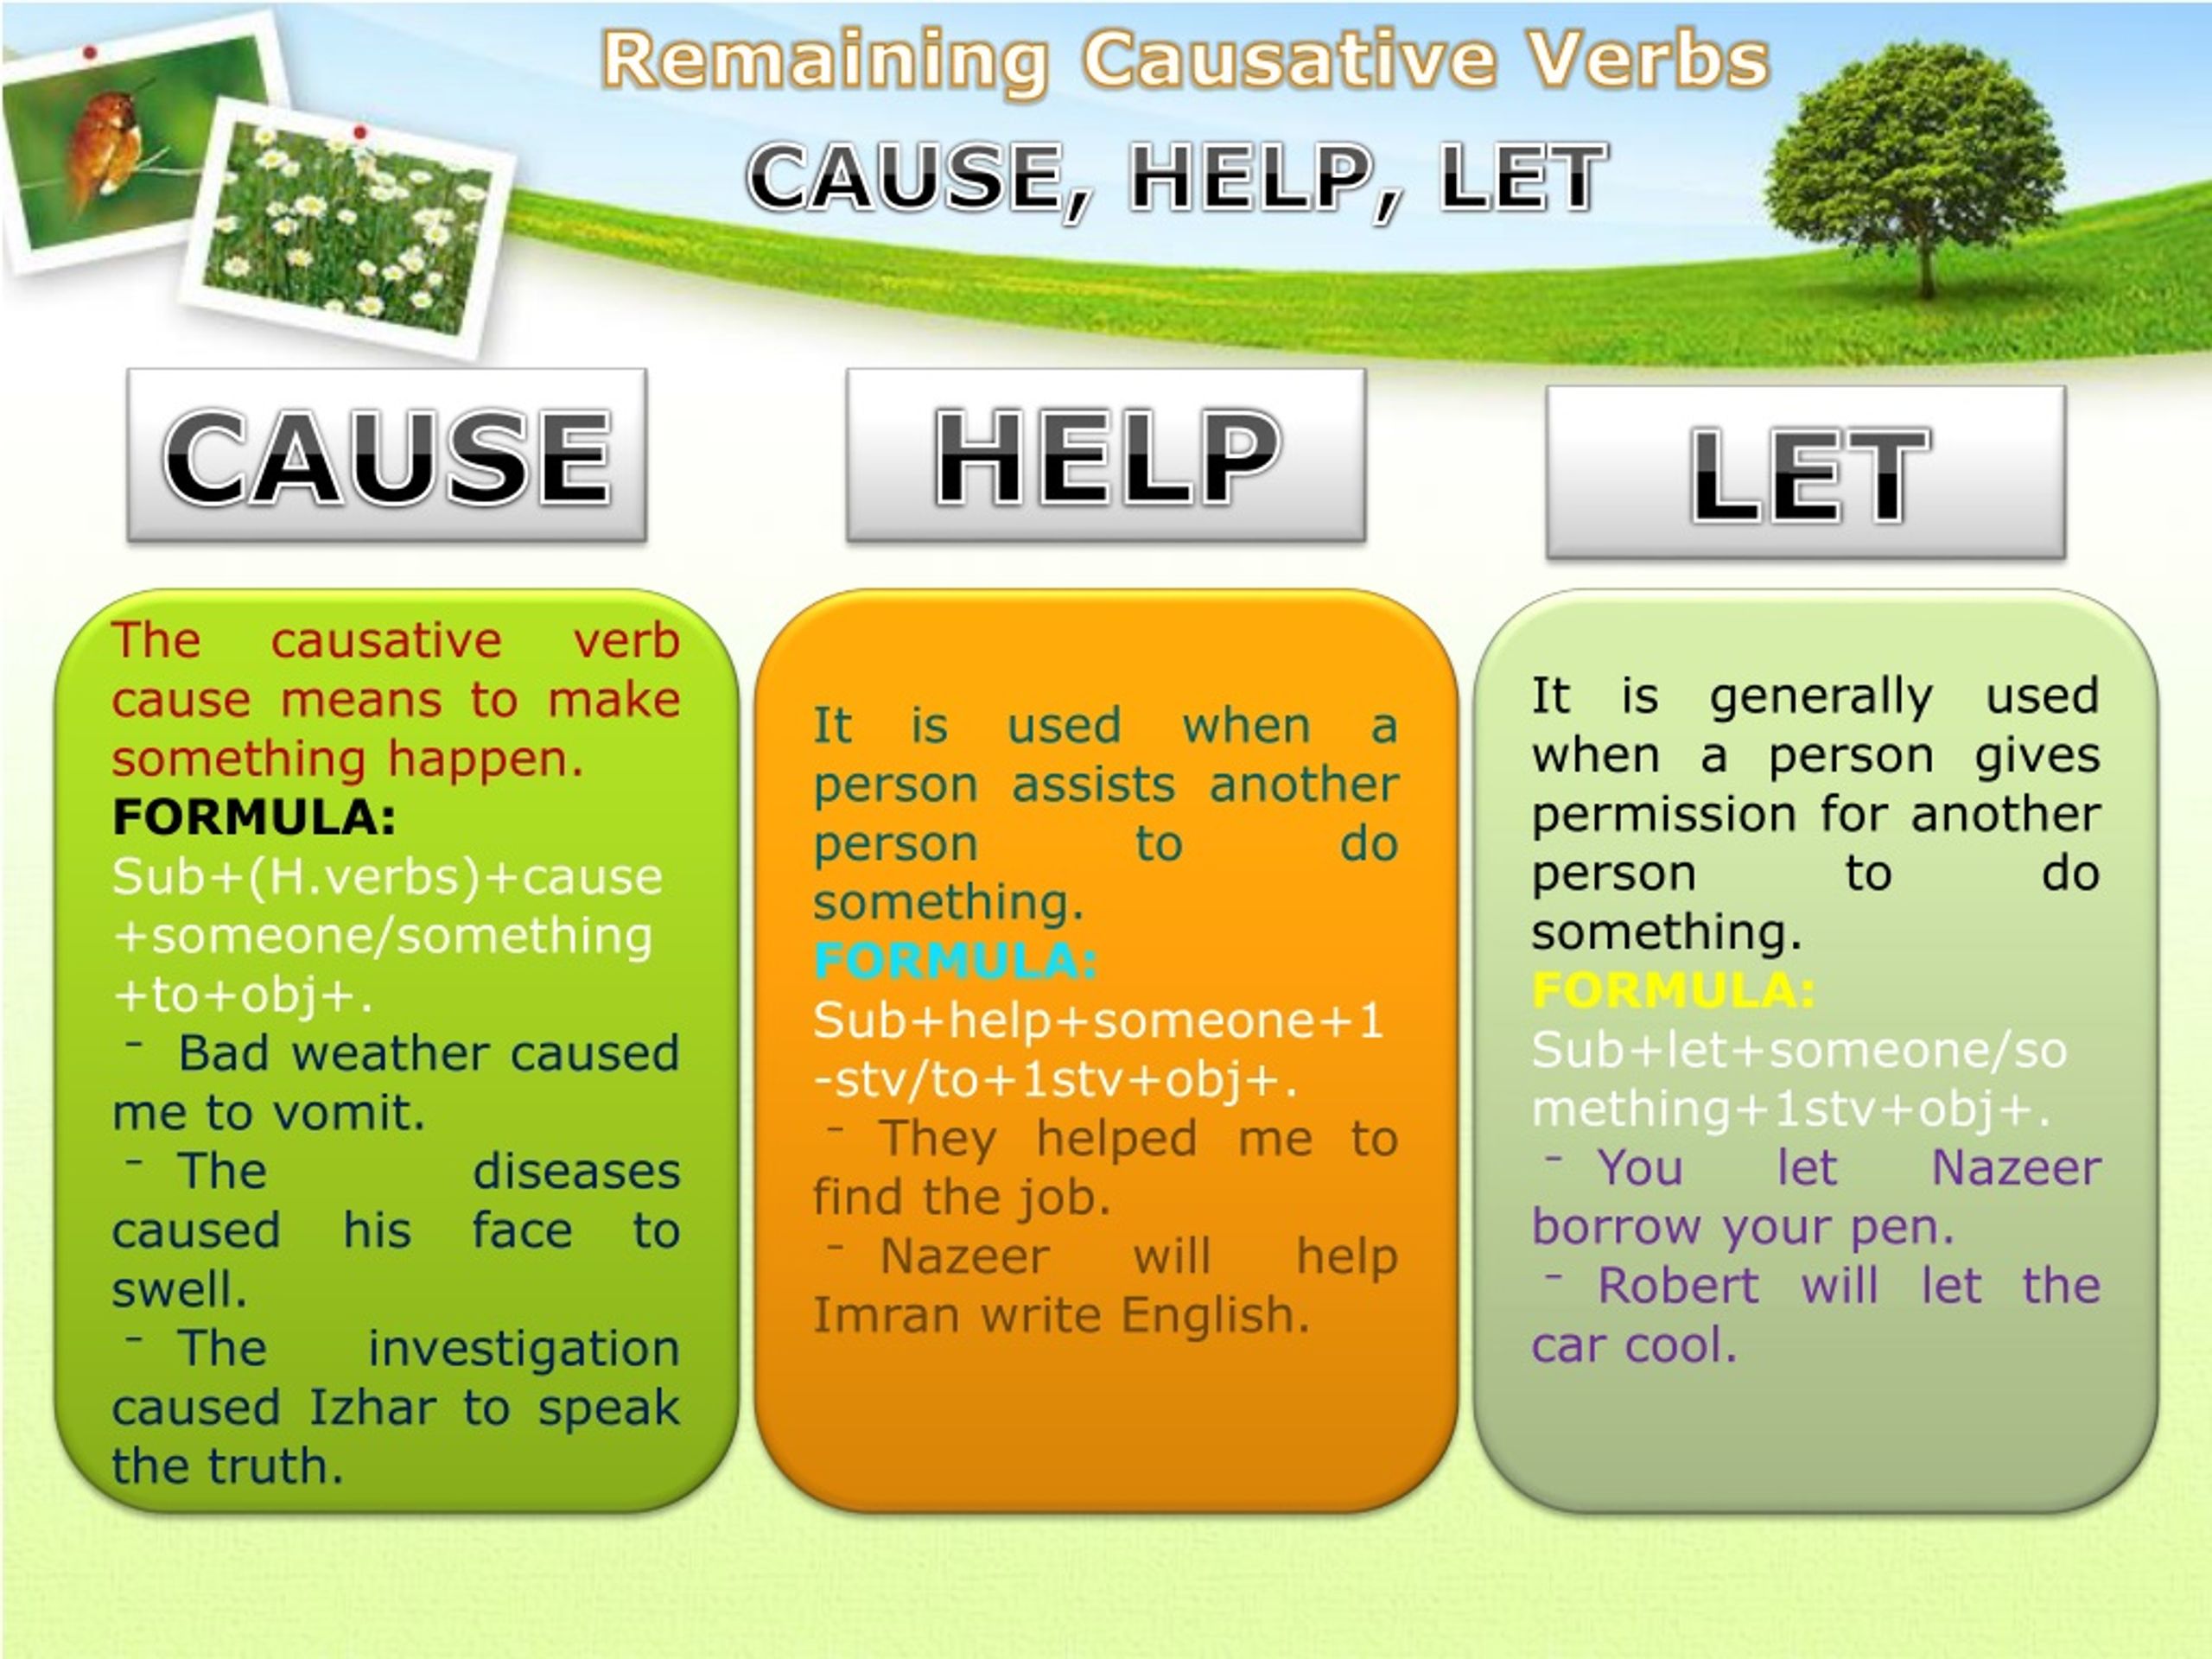 causative-verb-in-detail-let-make-have-get-help-examples-and